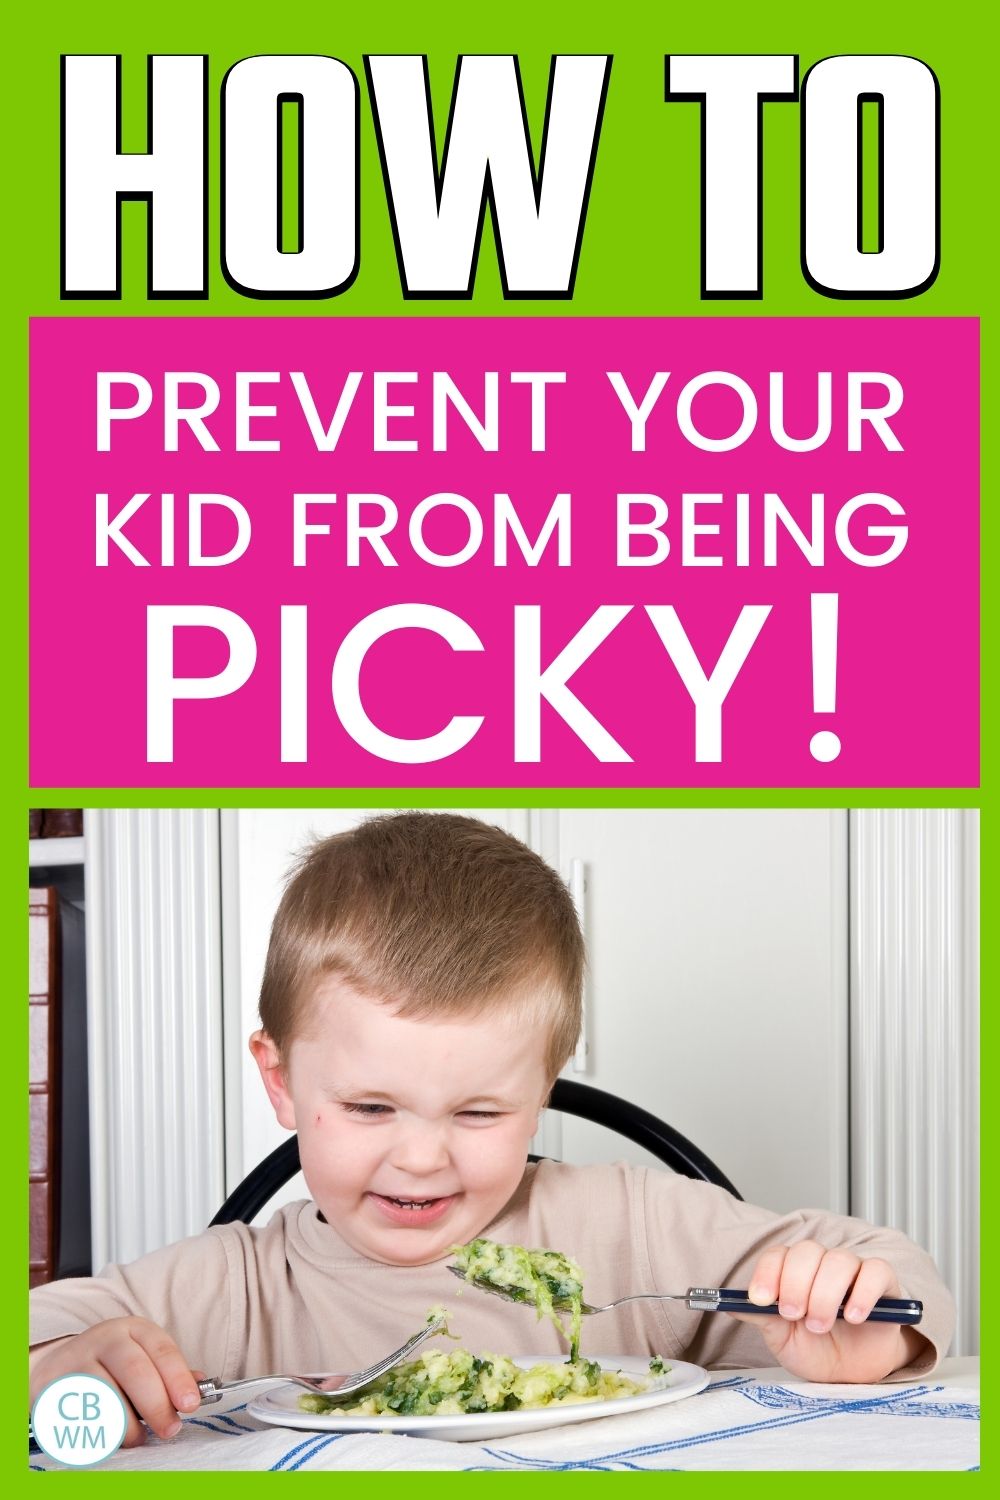 How to prevent picky eating pinnable image